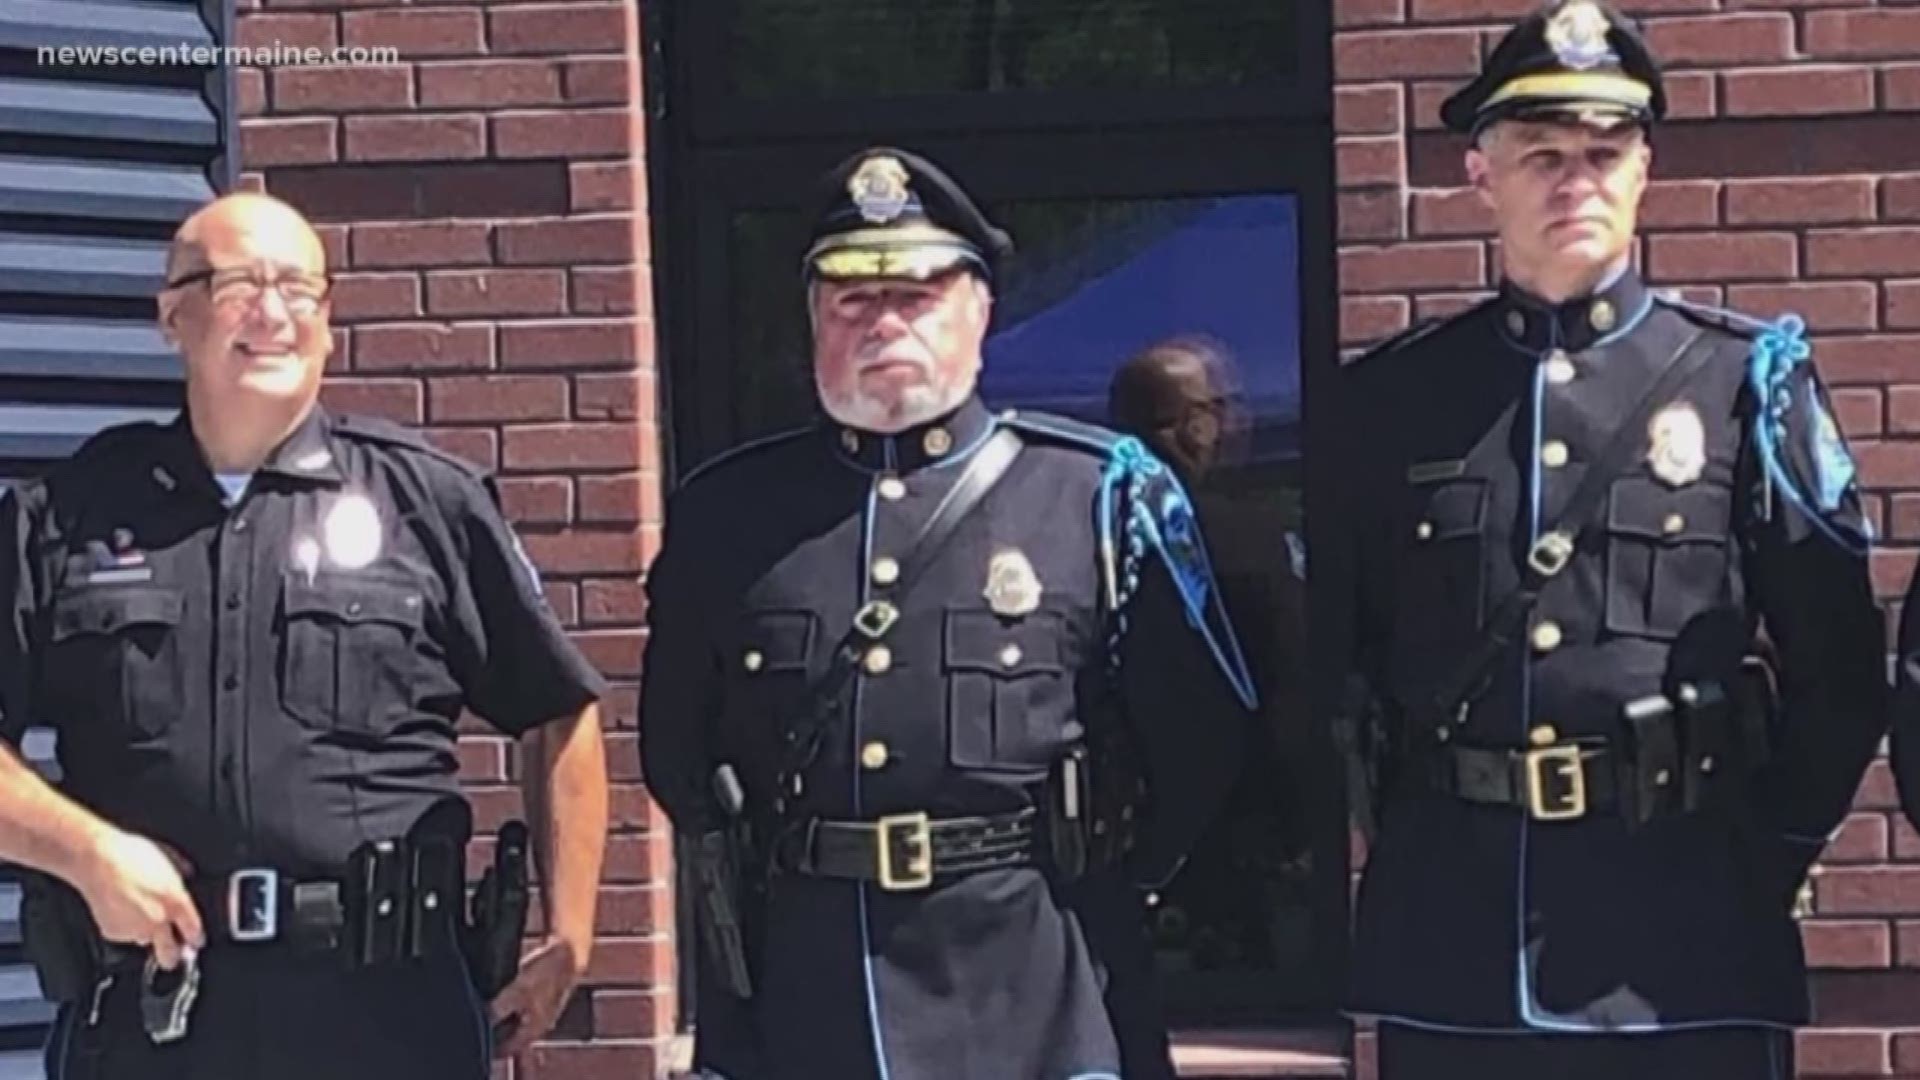 Chaplain Jeffrey Pelkey spent more than 35 years as a police officer and firefighter in Kittery, Eliot, and the Berwicks.